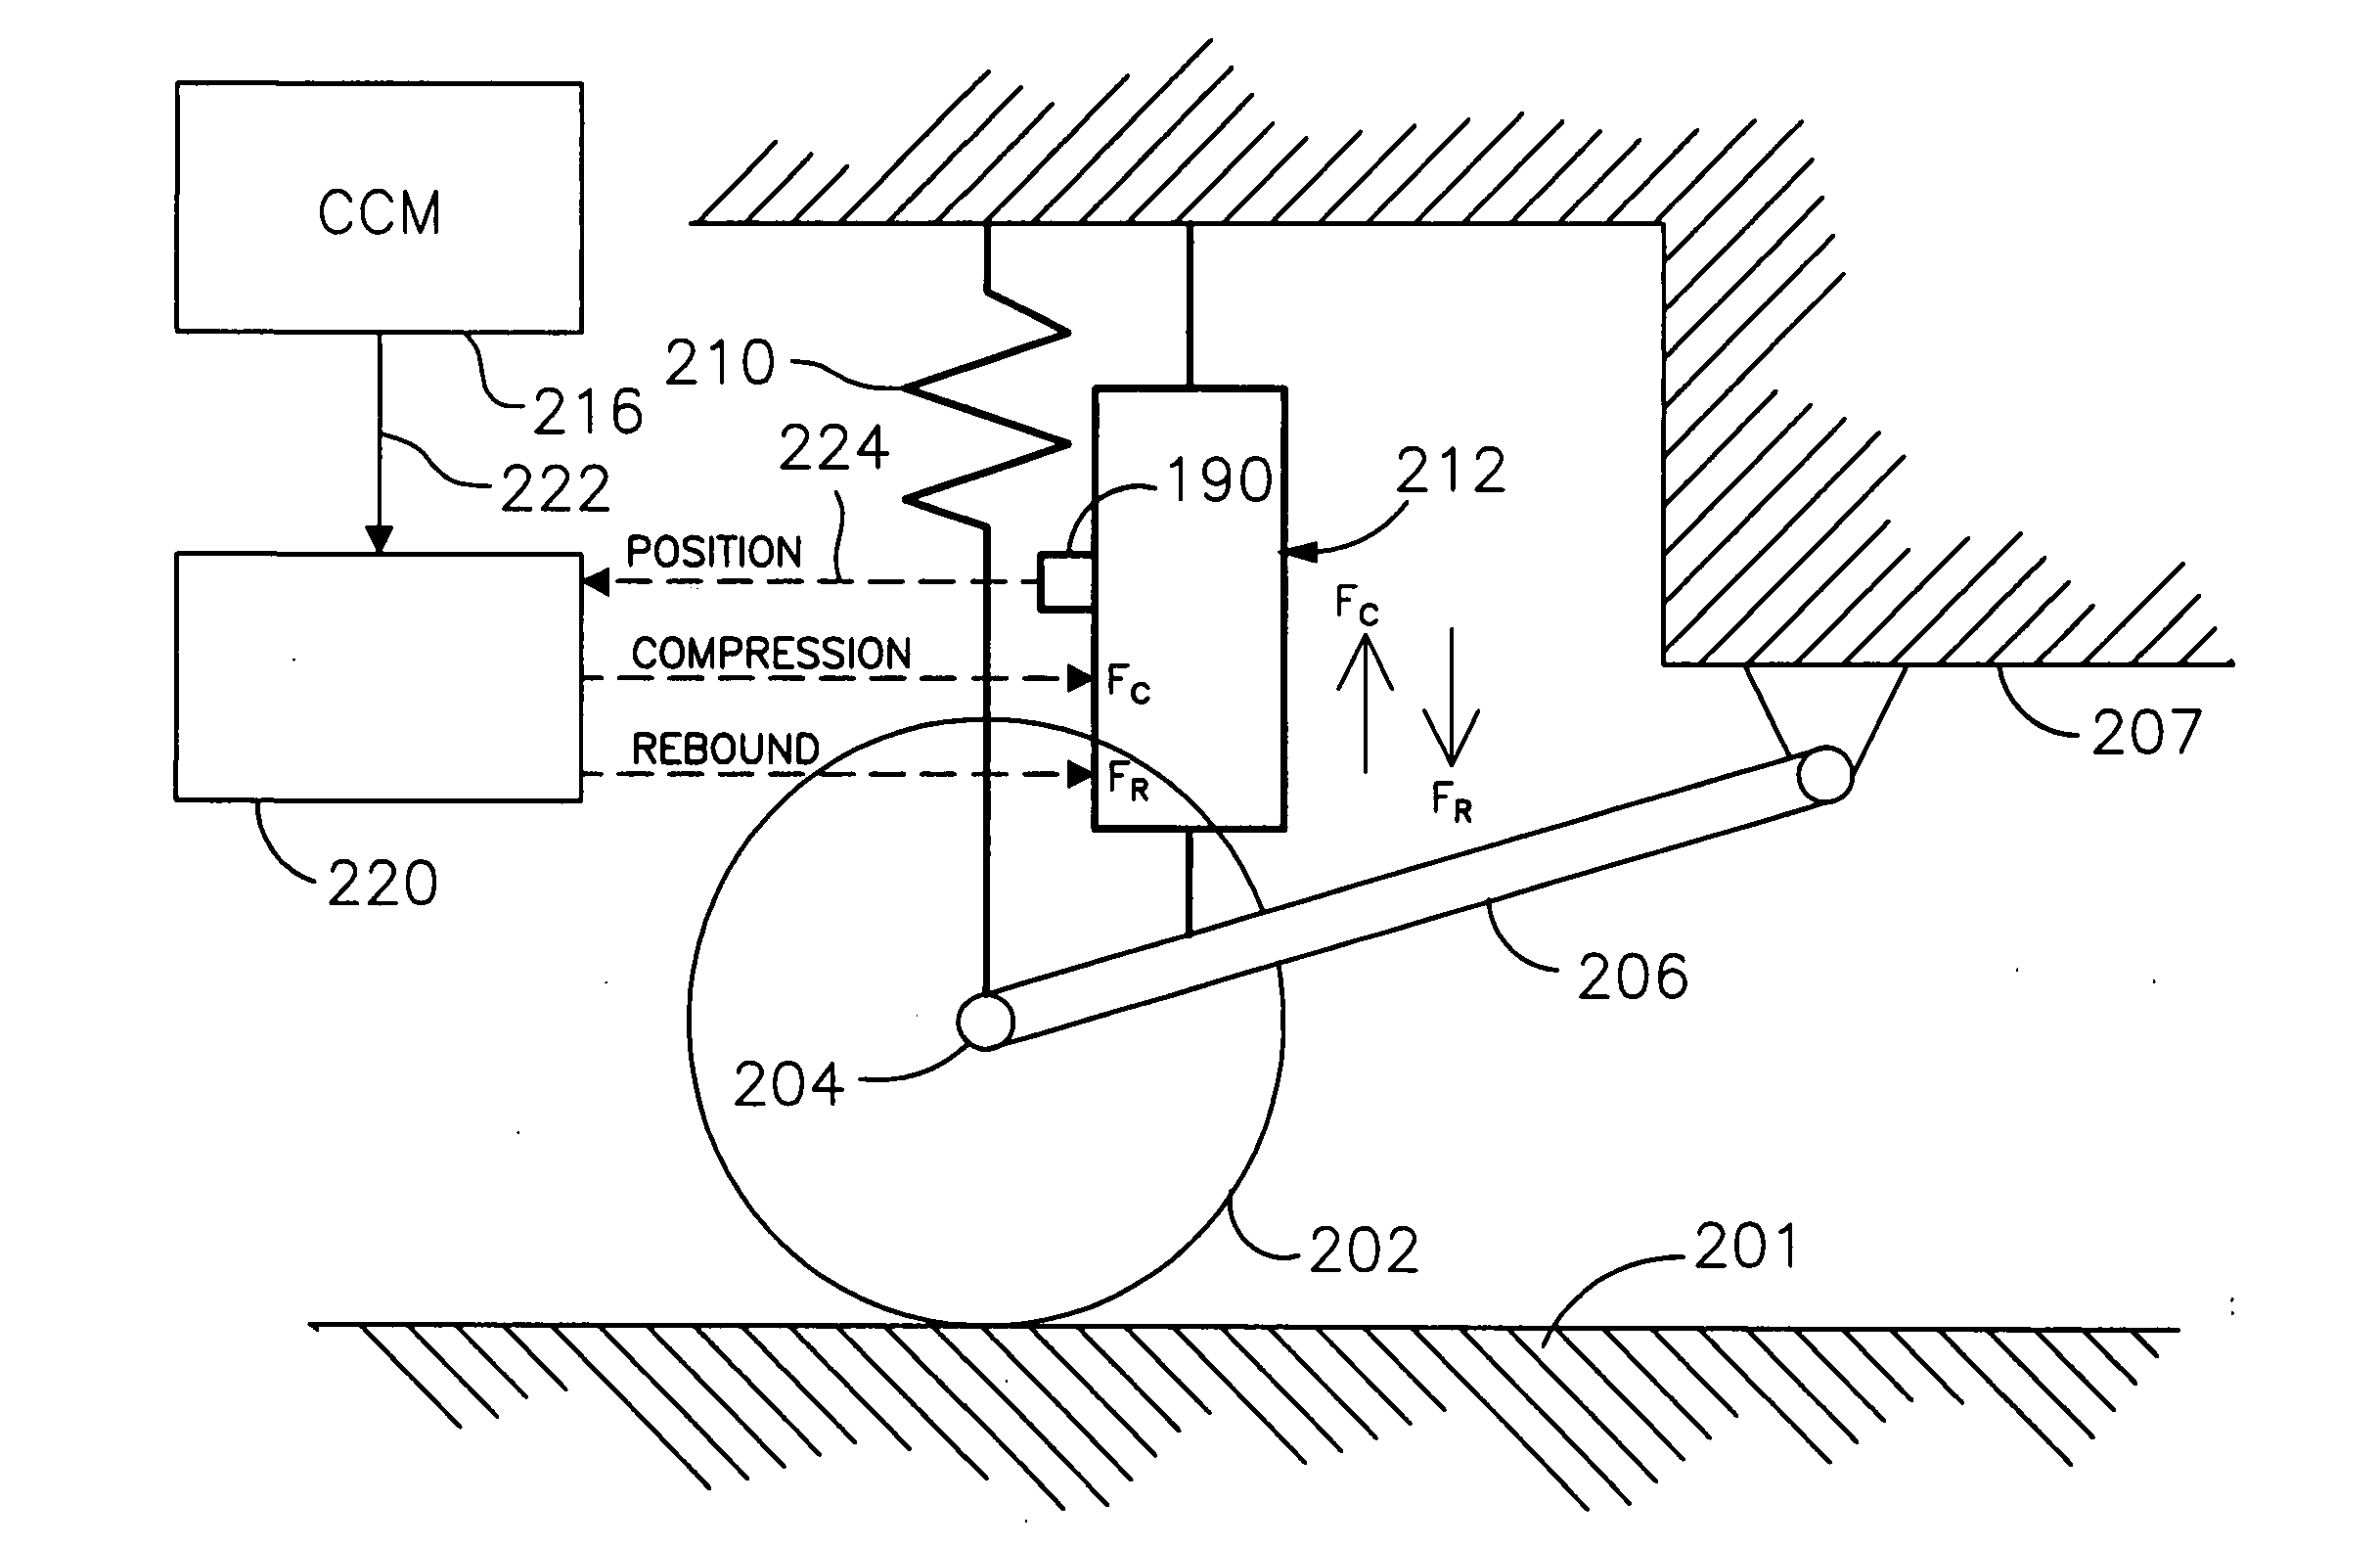 Enhanced computer optimized adaptive suspension system and method